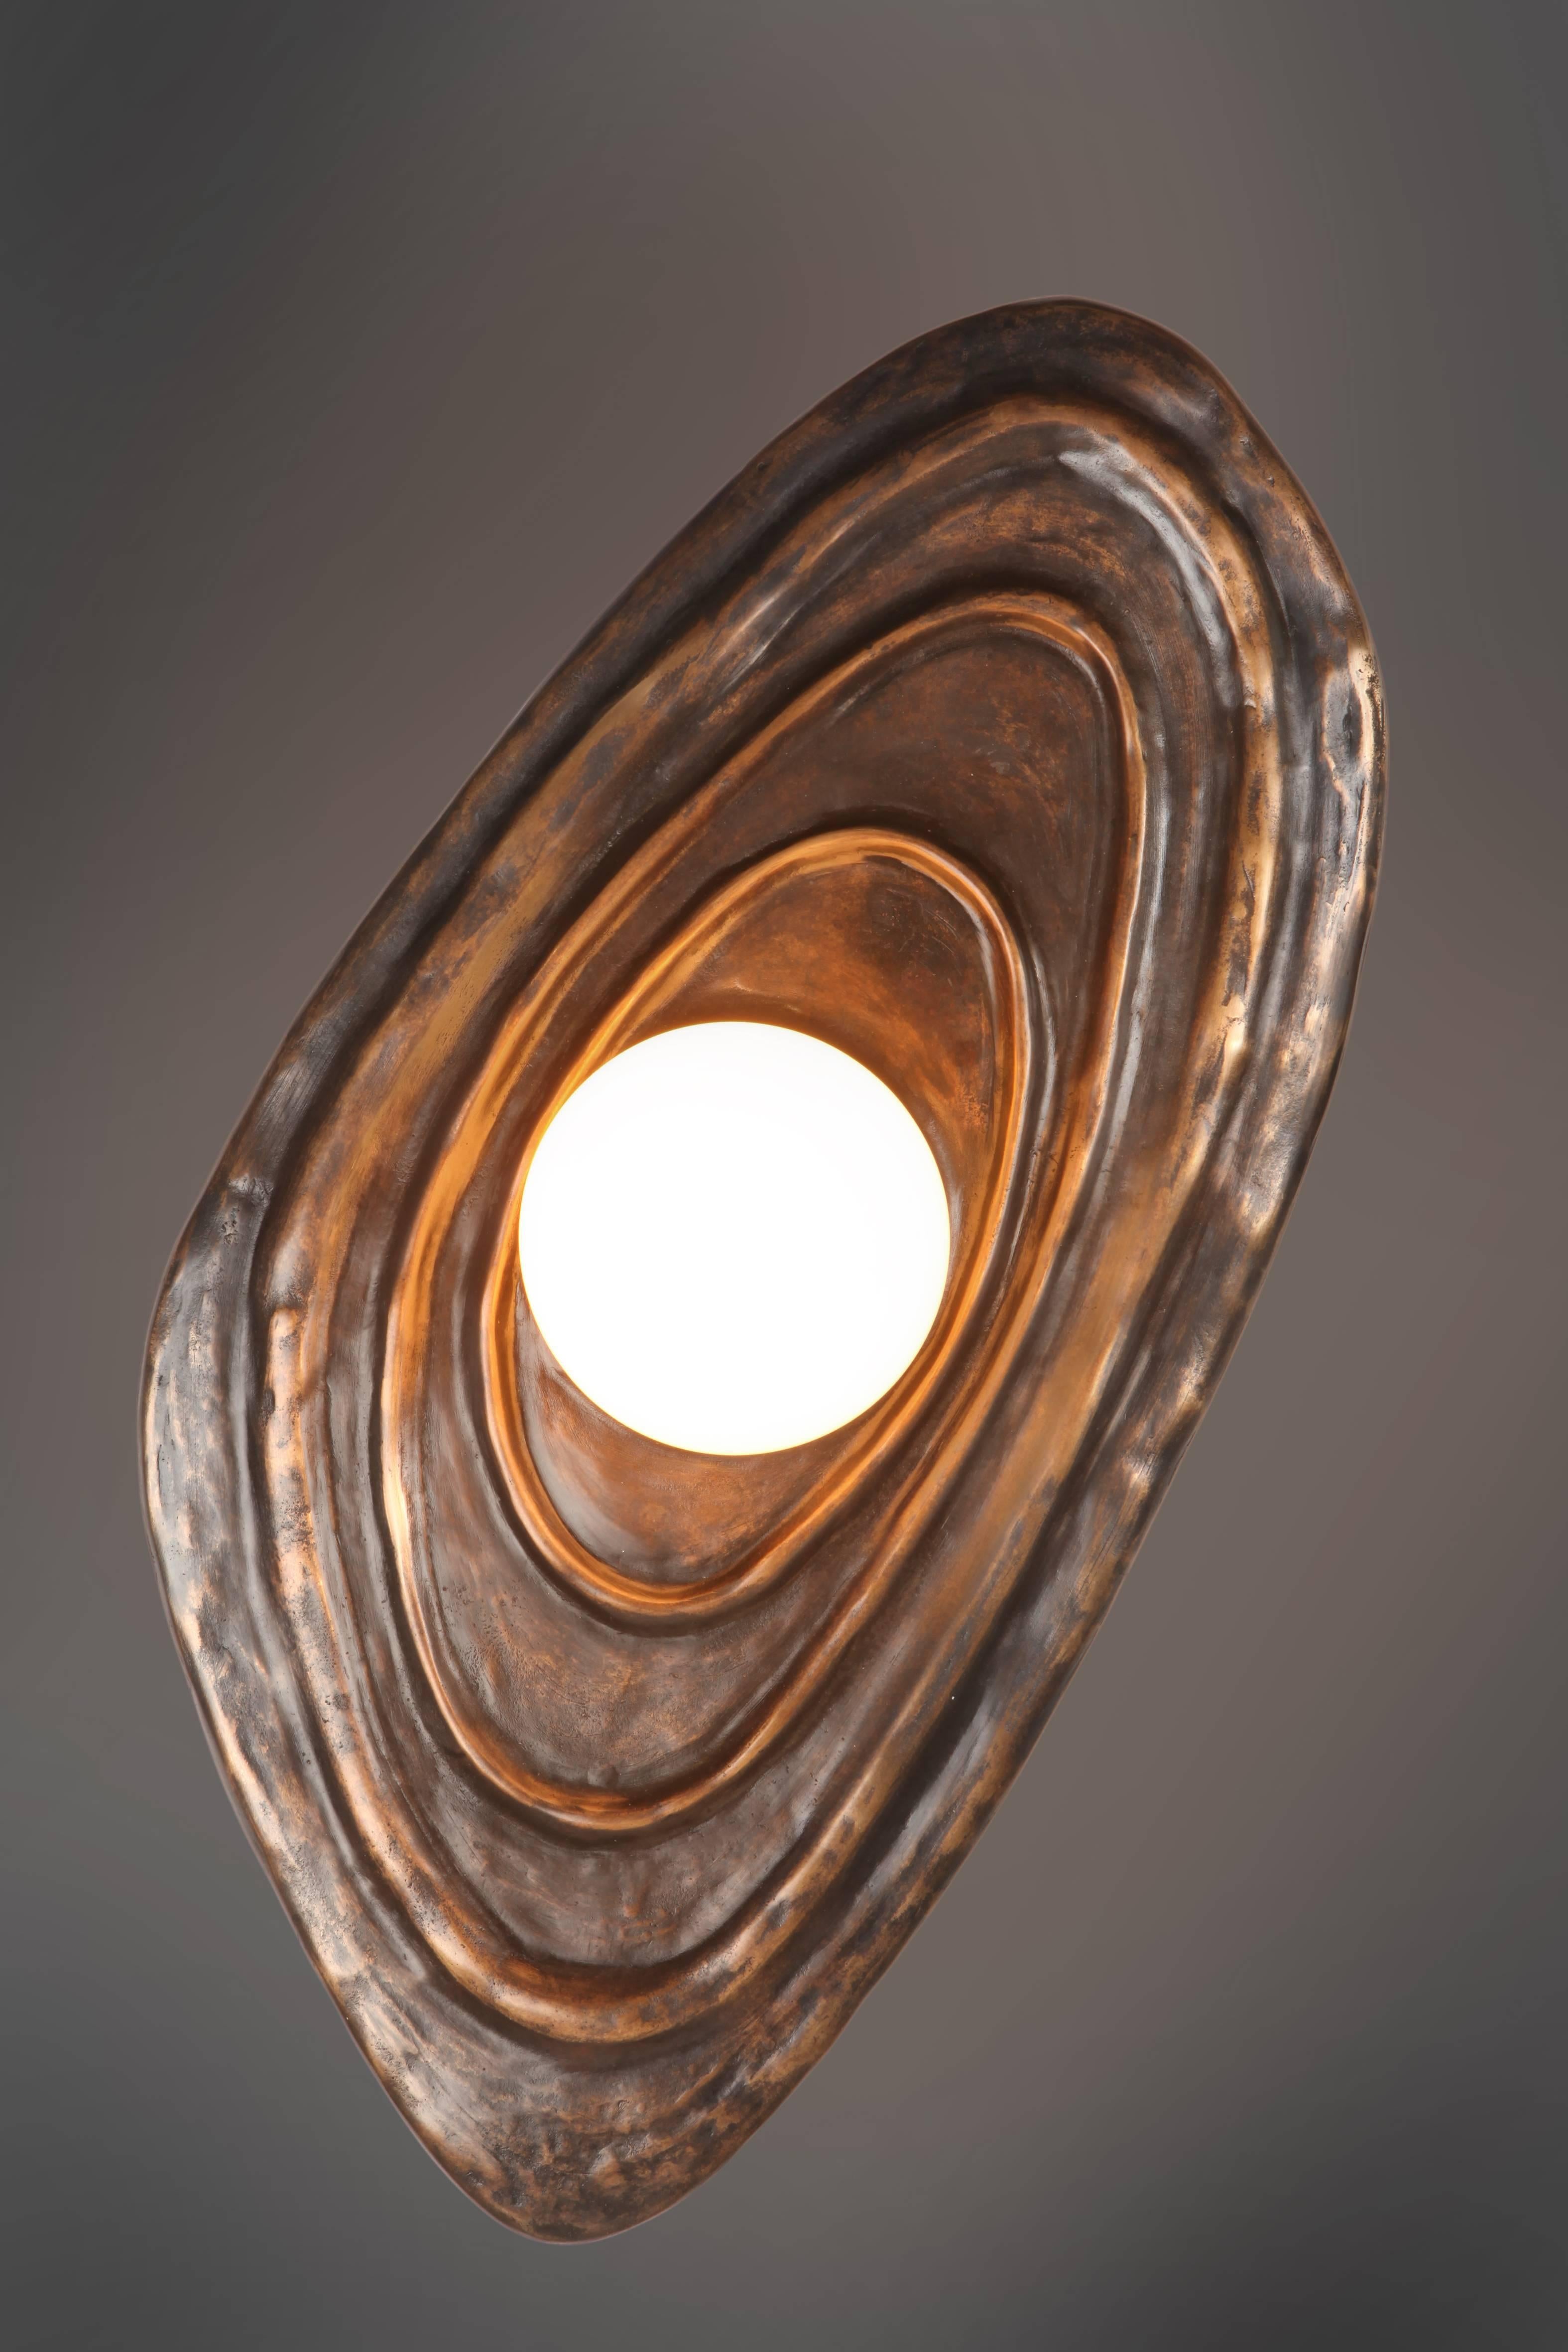 Designed and created by Charles Burnand Studio, the organic shape of the perla wall sconce was inspired by the lines of Japanese gardens with the subtle undulations of the interior of a shell.

Cast in bronze the perla wall sconce can be patinated